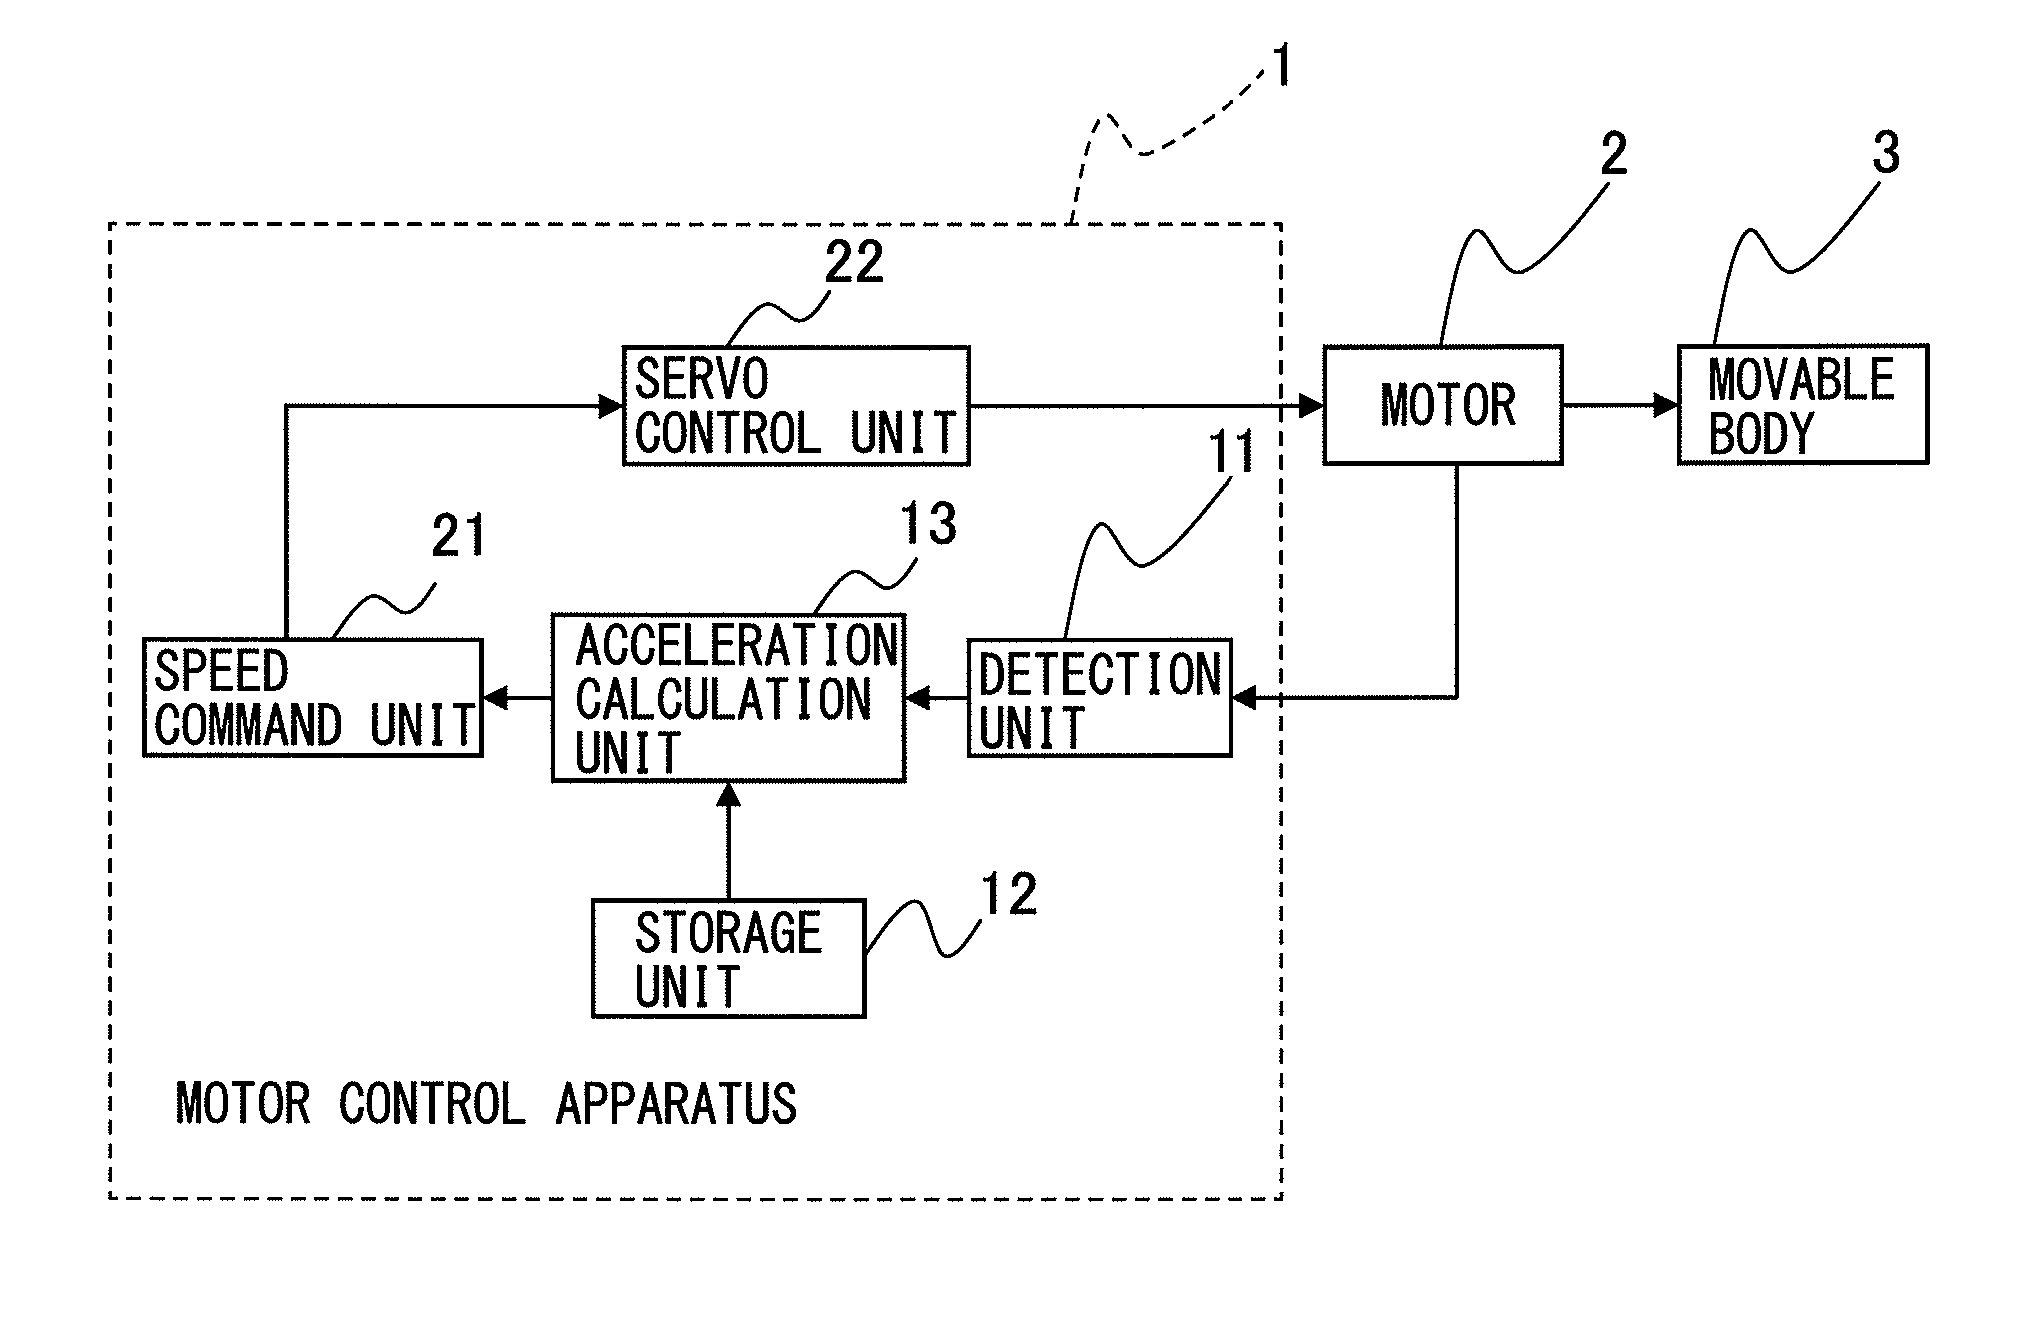 Motor control apparatus generating command limited by motor torque